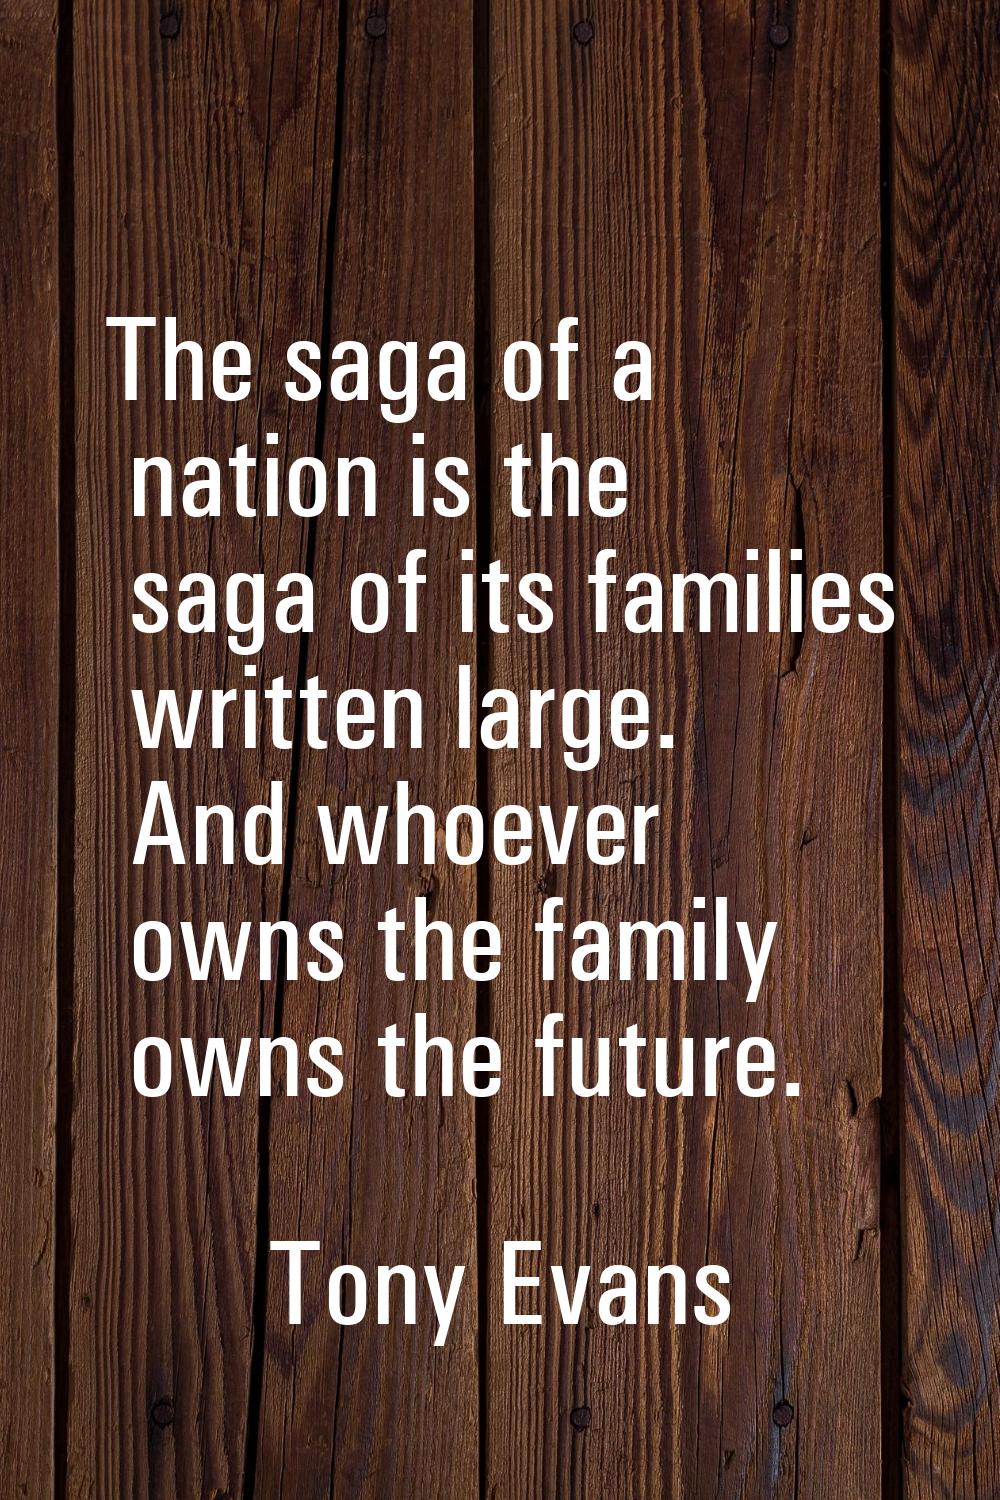 The saga of a nation is the saga of its families written large. And whoever owns the family owns th